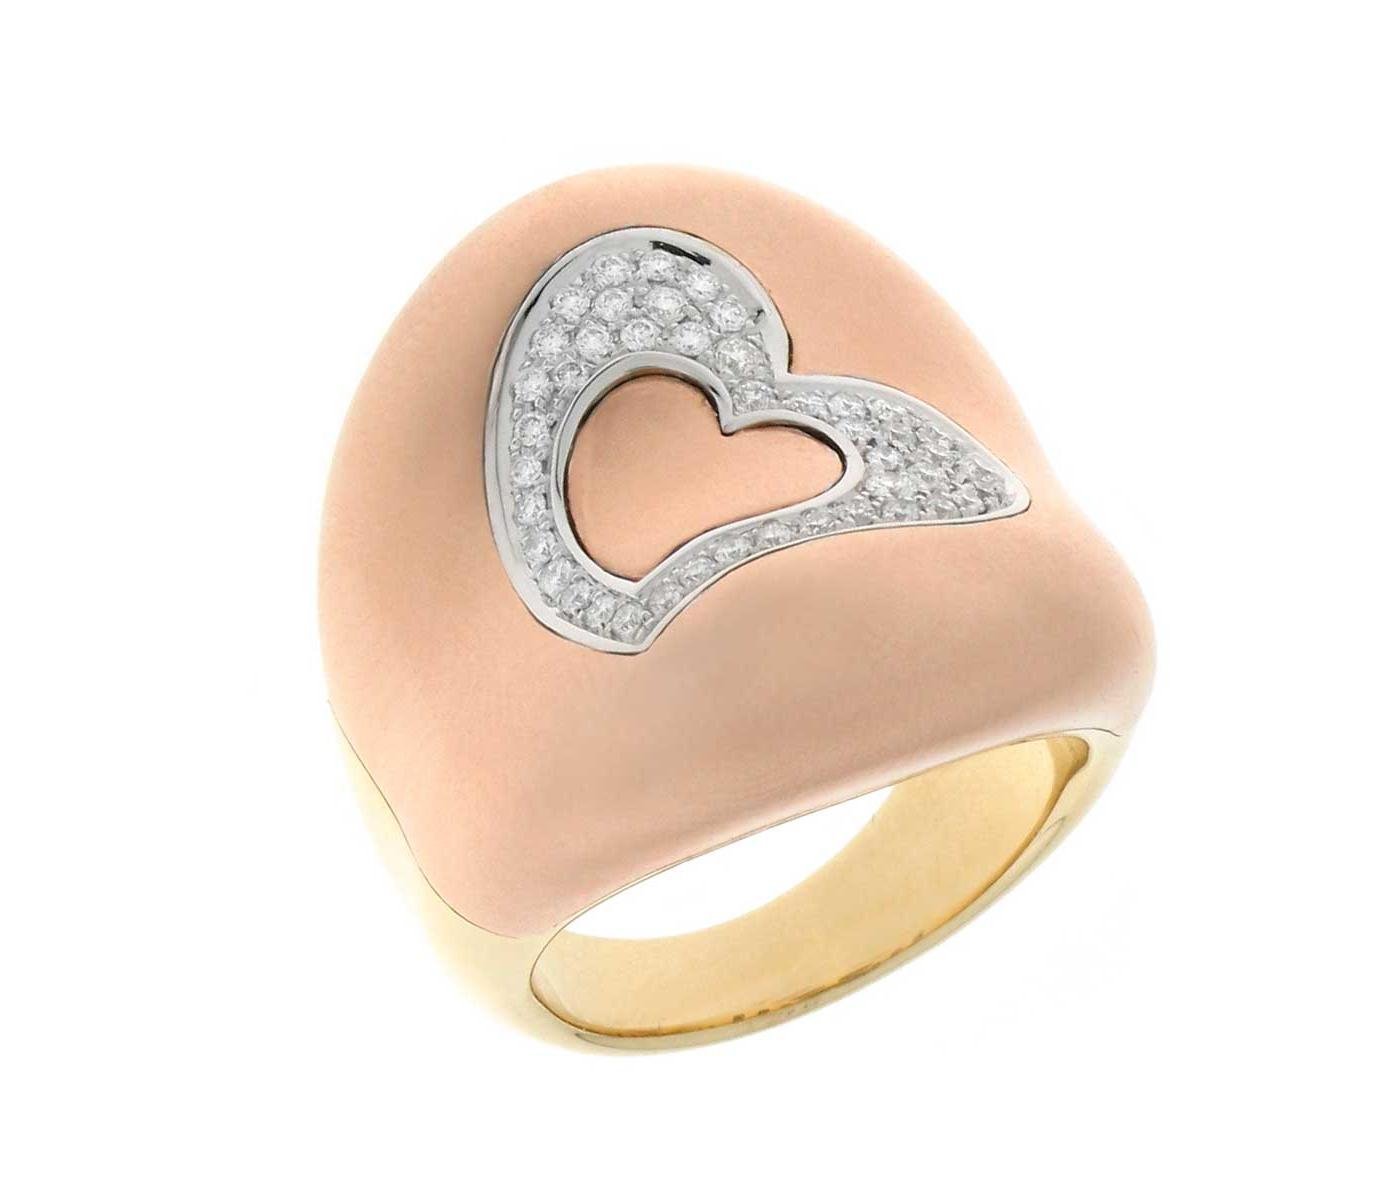 Ring by Chimento